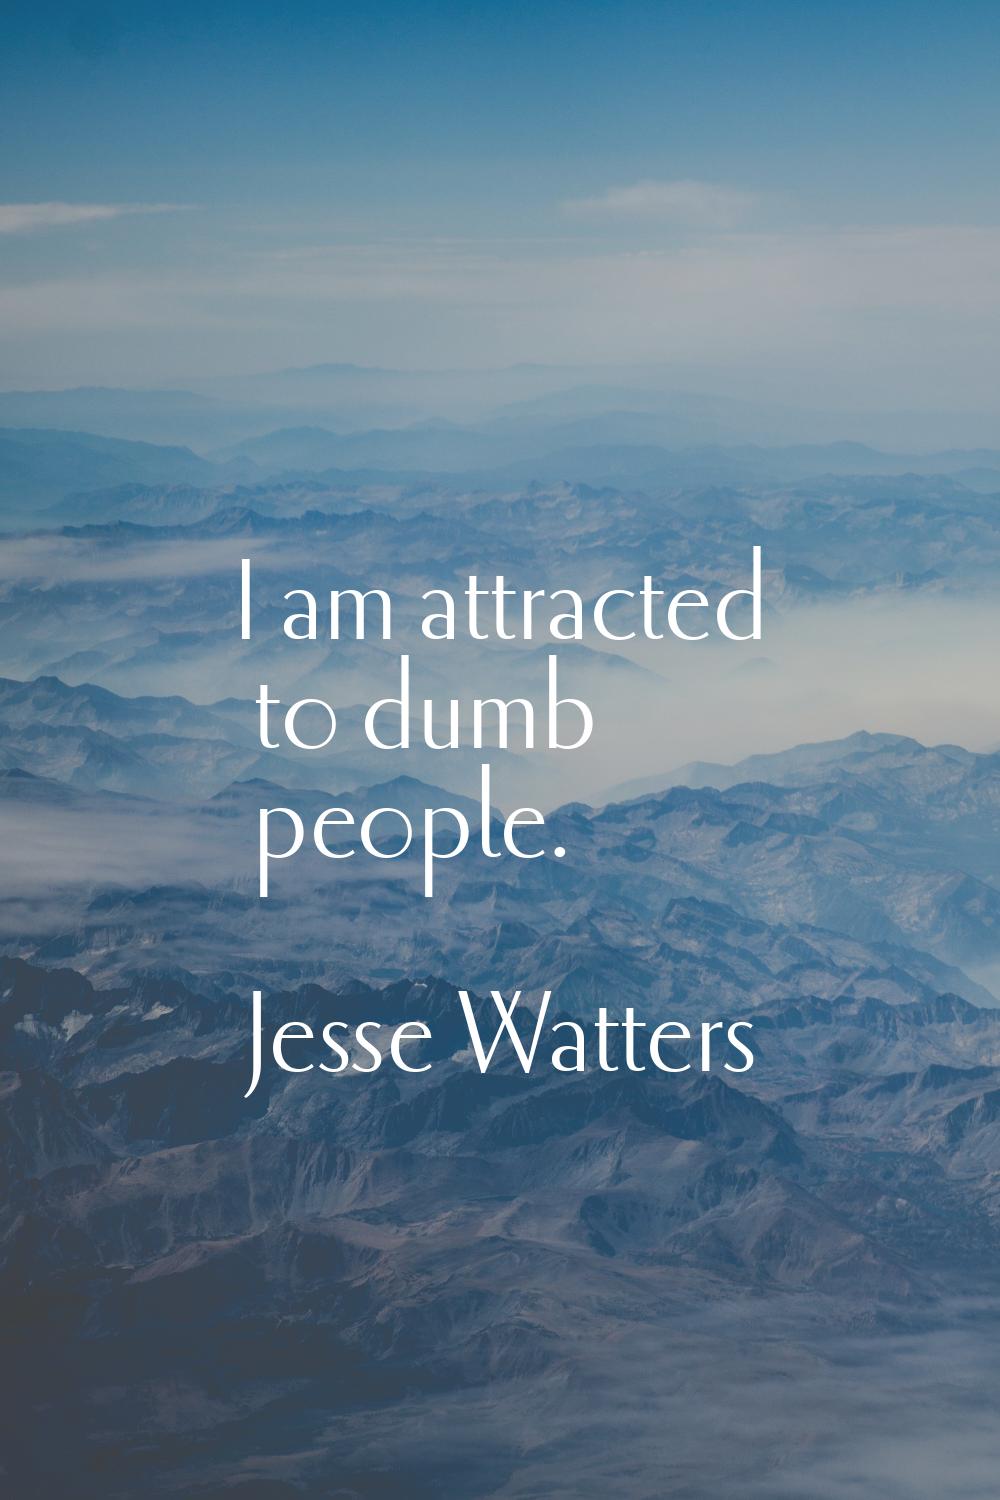 I am attracted to dumb people.